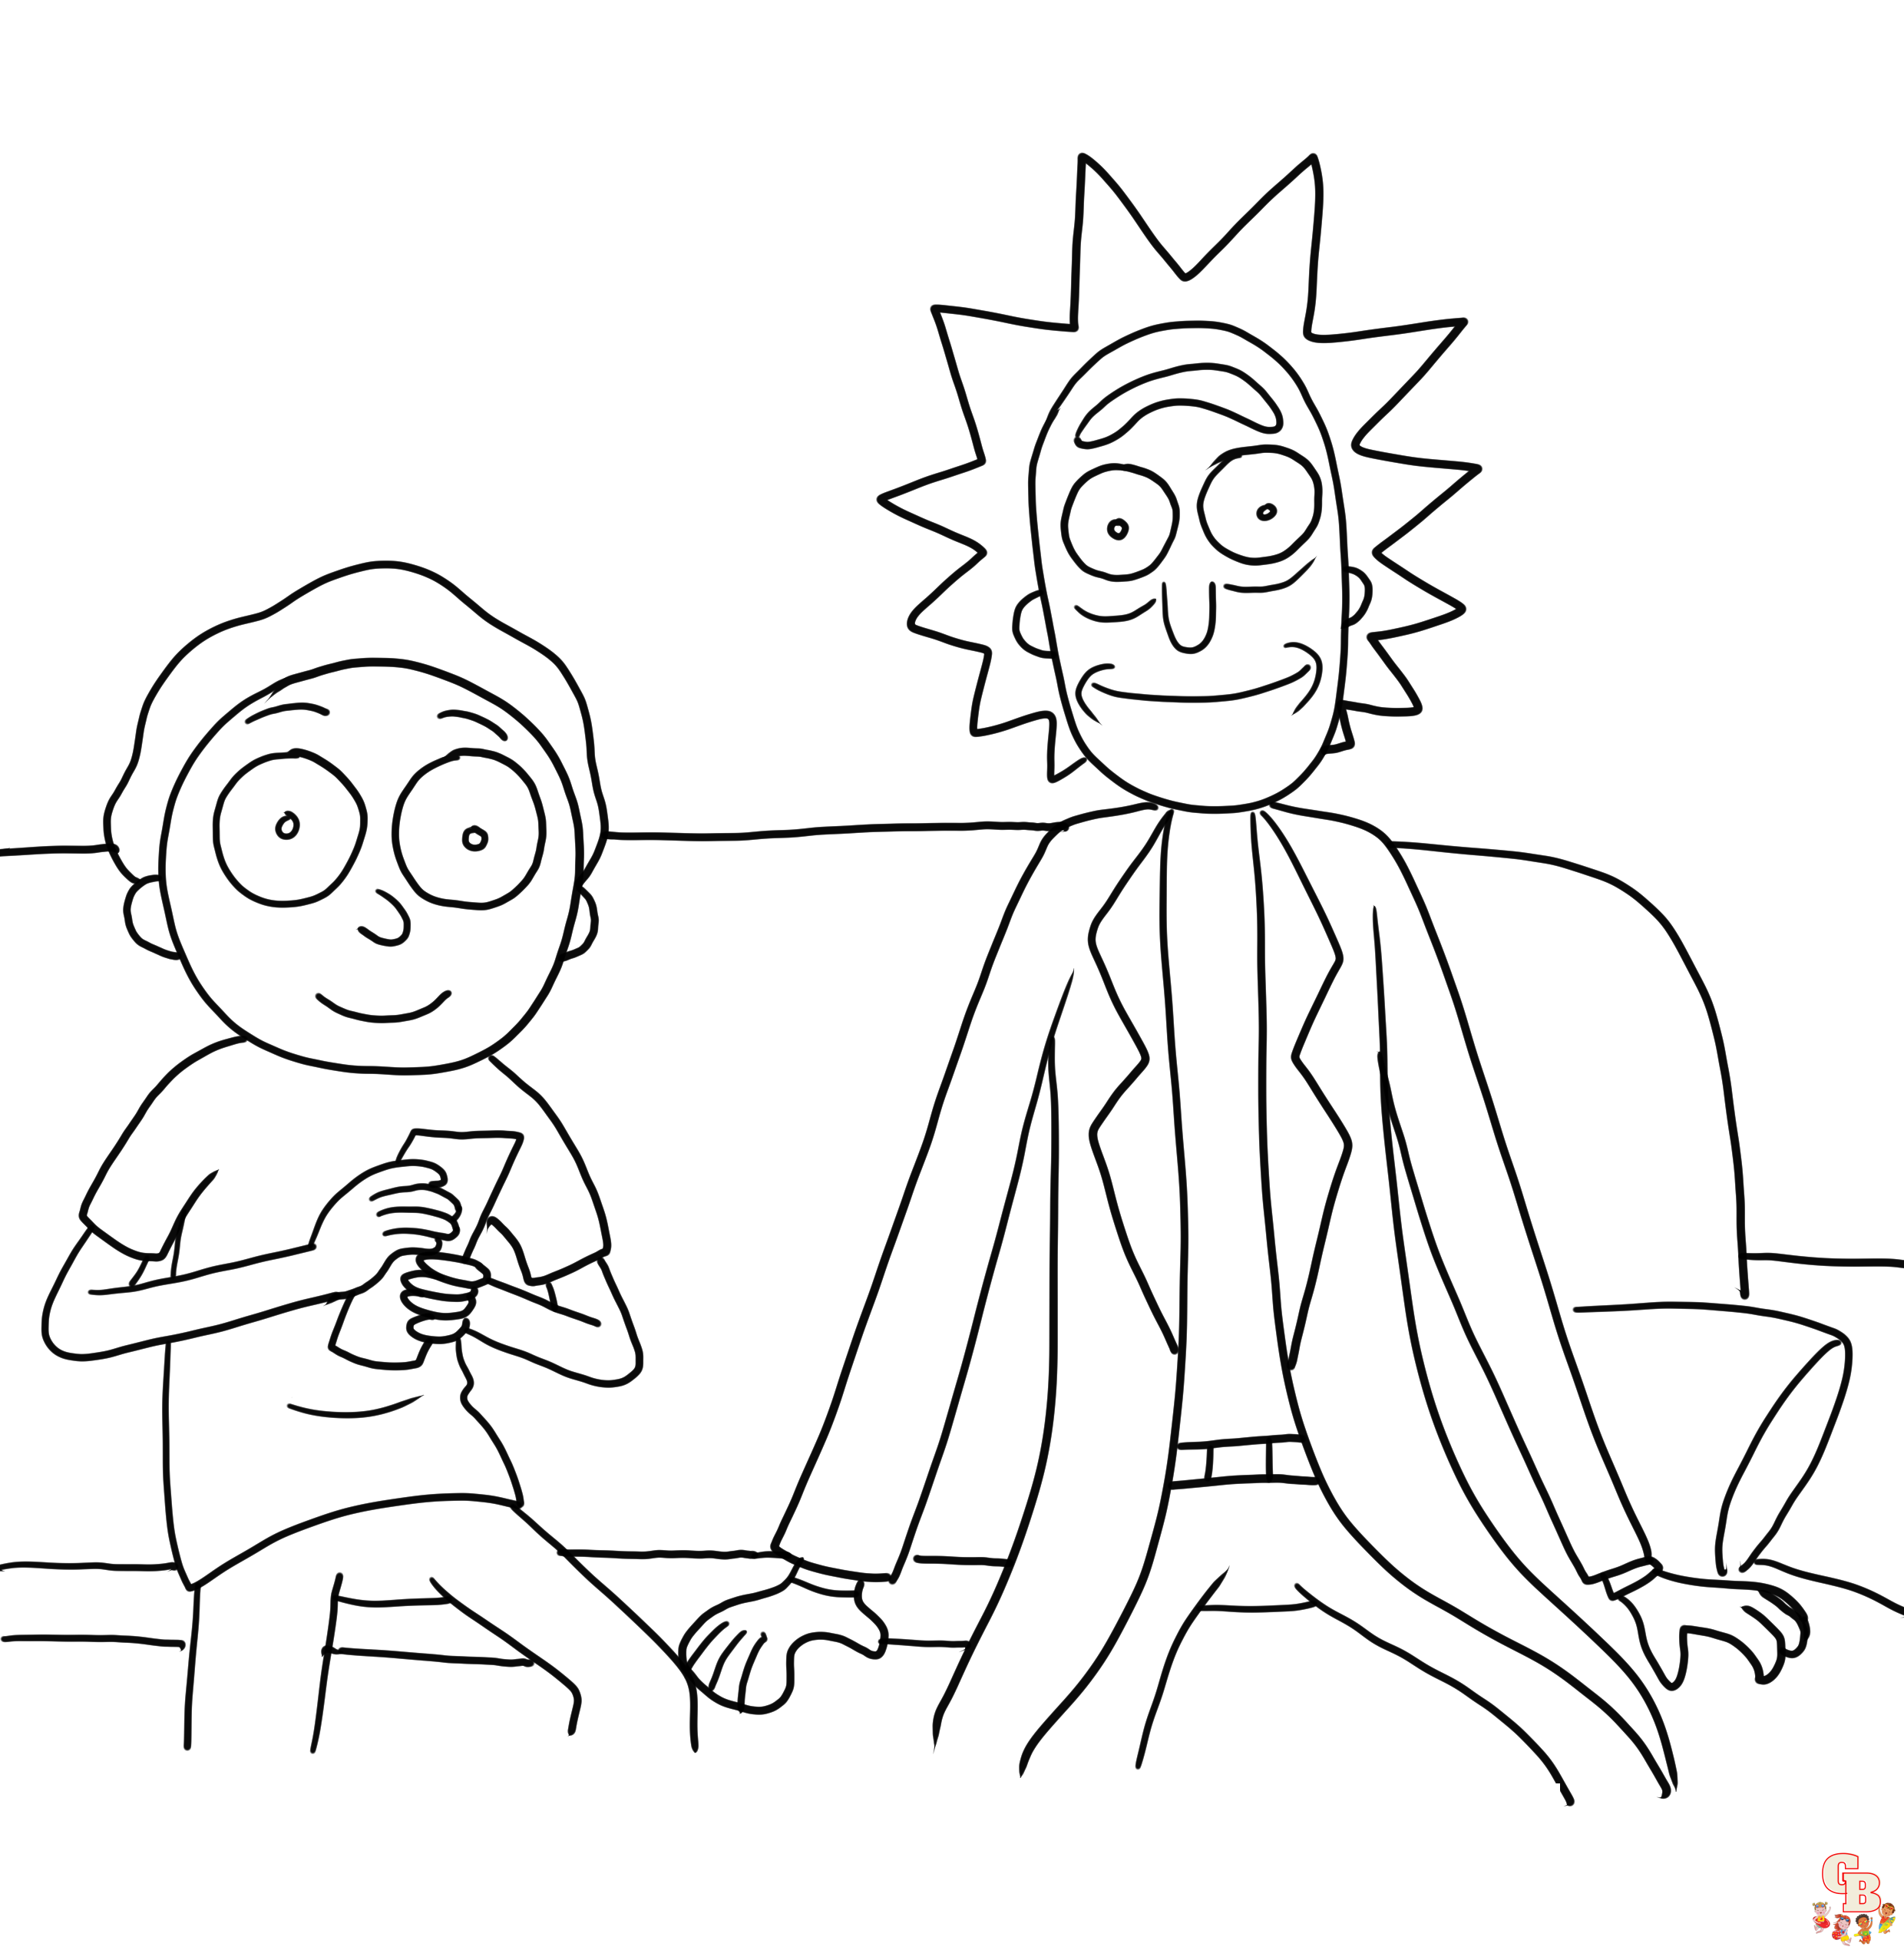 Rick and Morty Coloring Pages 2